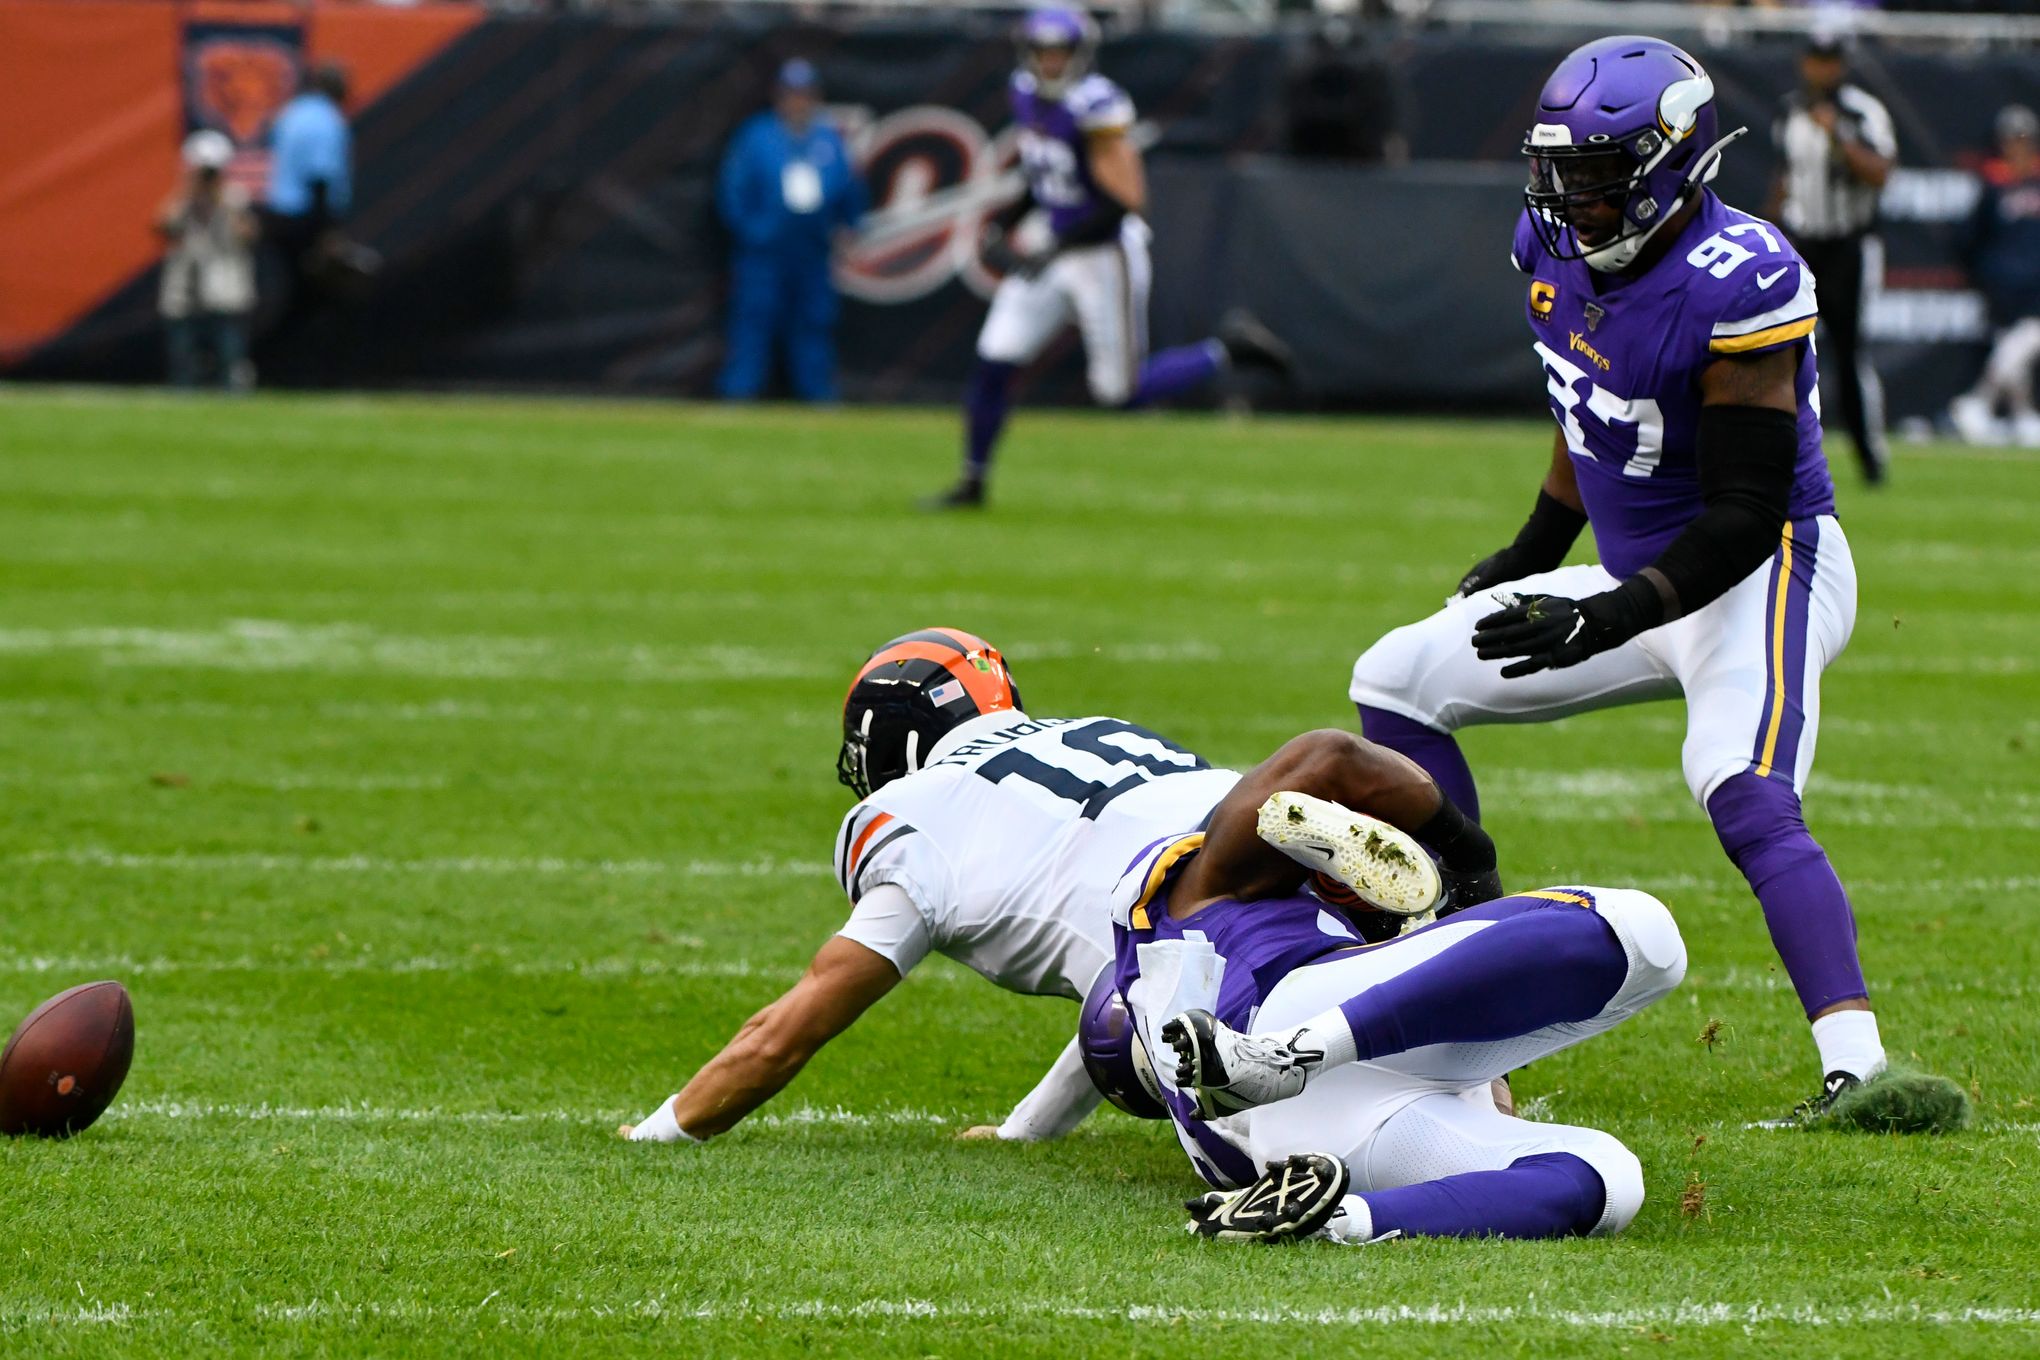 Cousins, Hicks lead way as Vikings knock out Fields, beat Bears 19